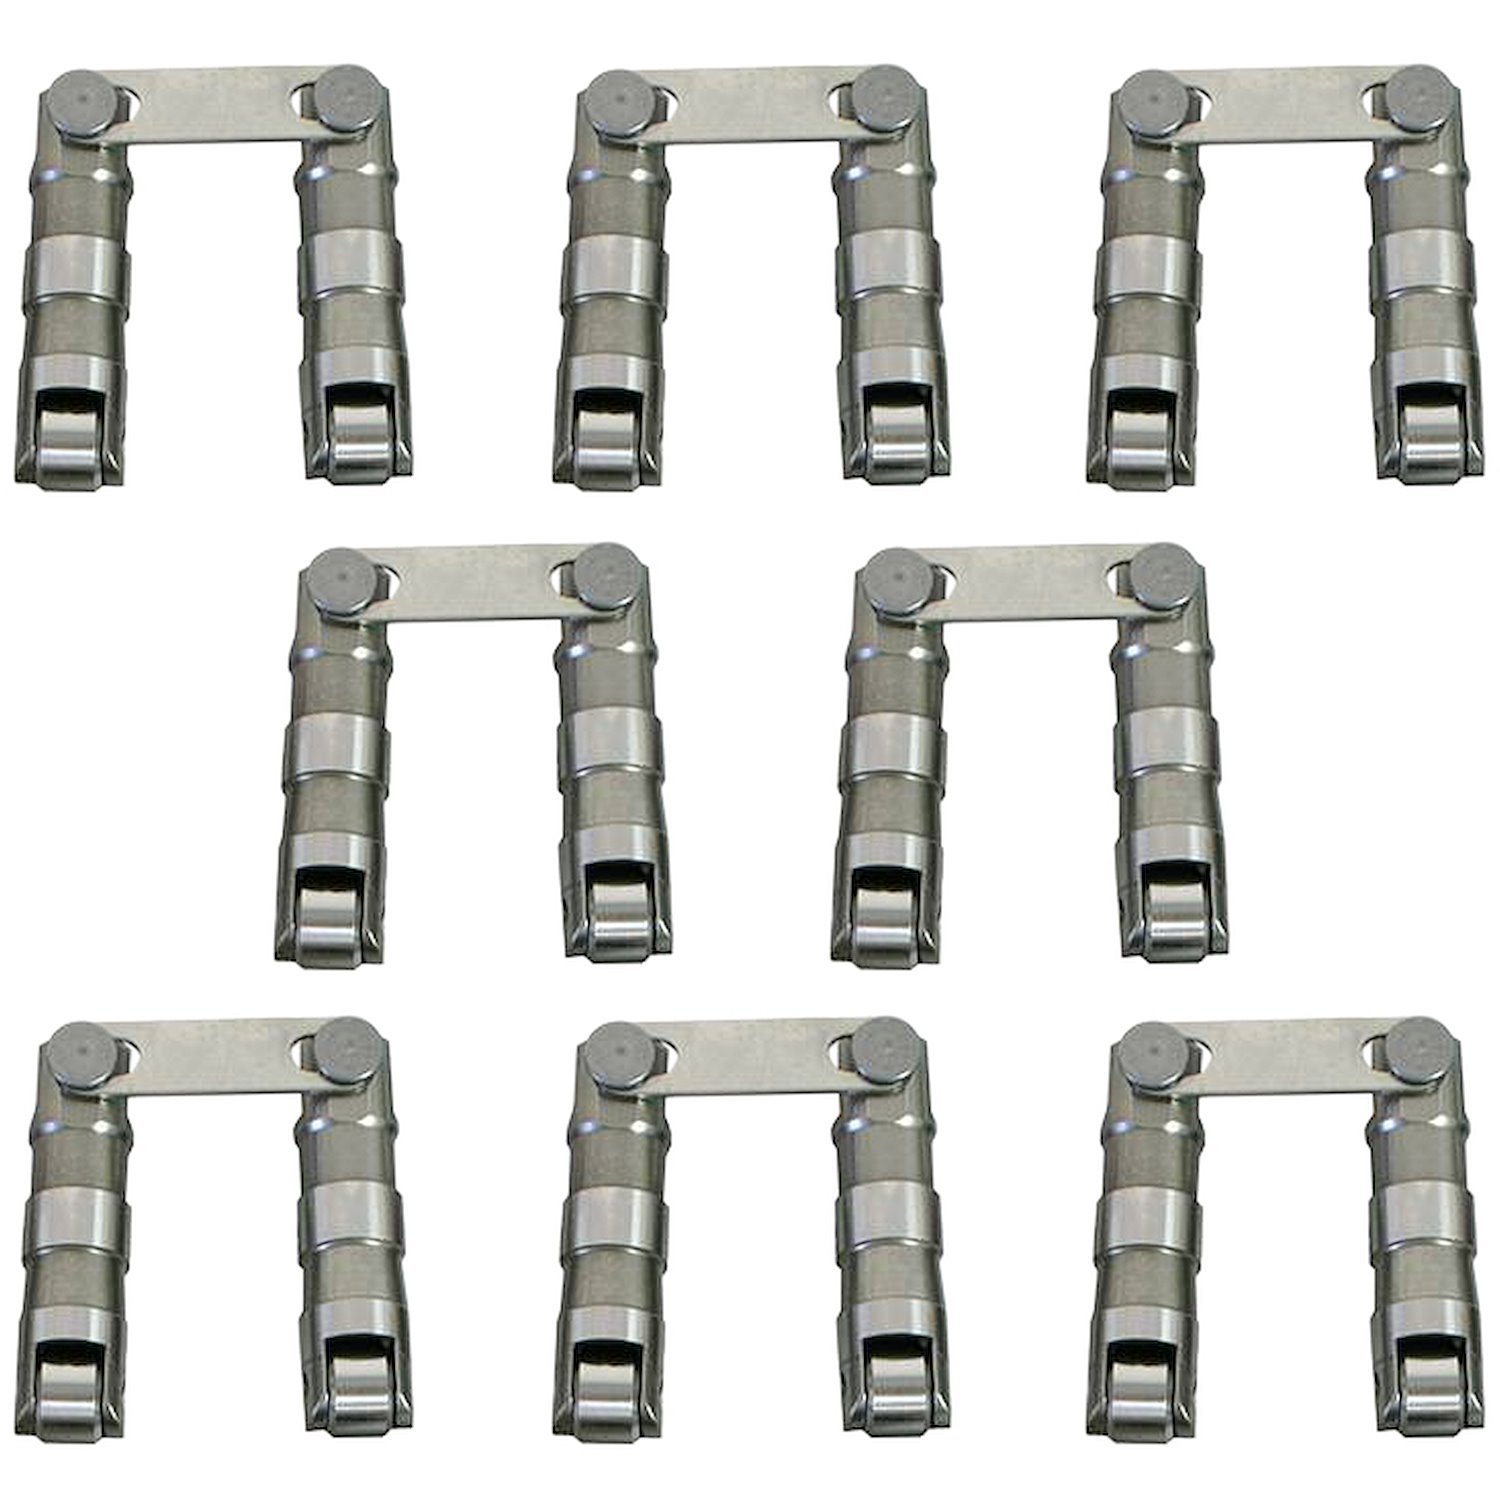 91160 Max Effort Retro-Fit Hydraulic Roller Lifter Set Chevy 265-400